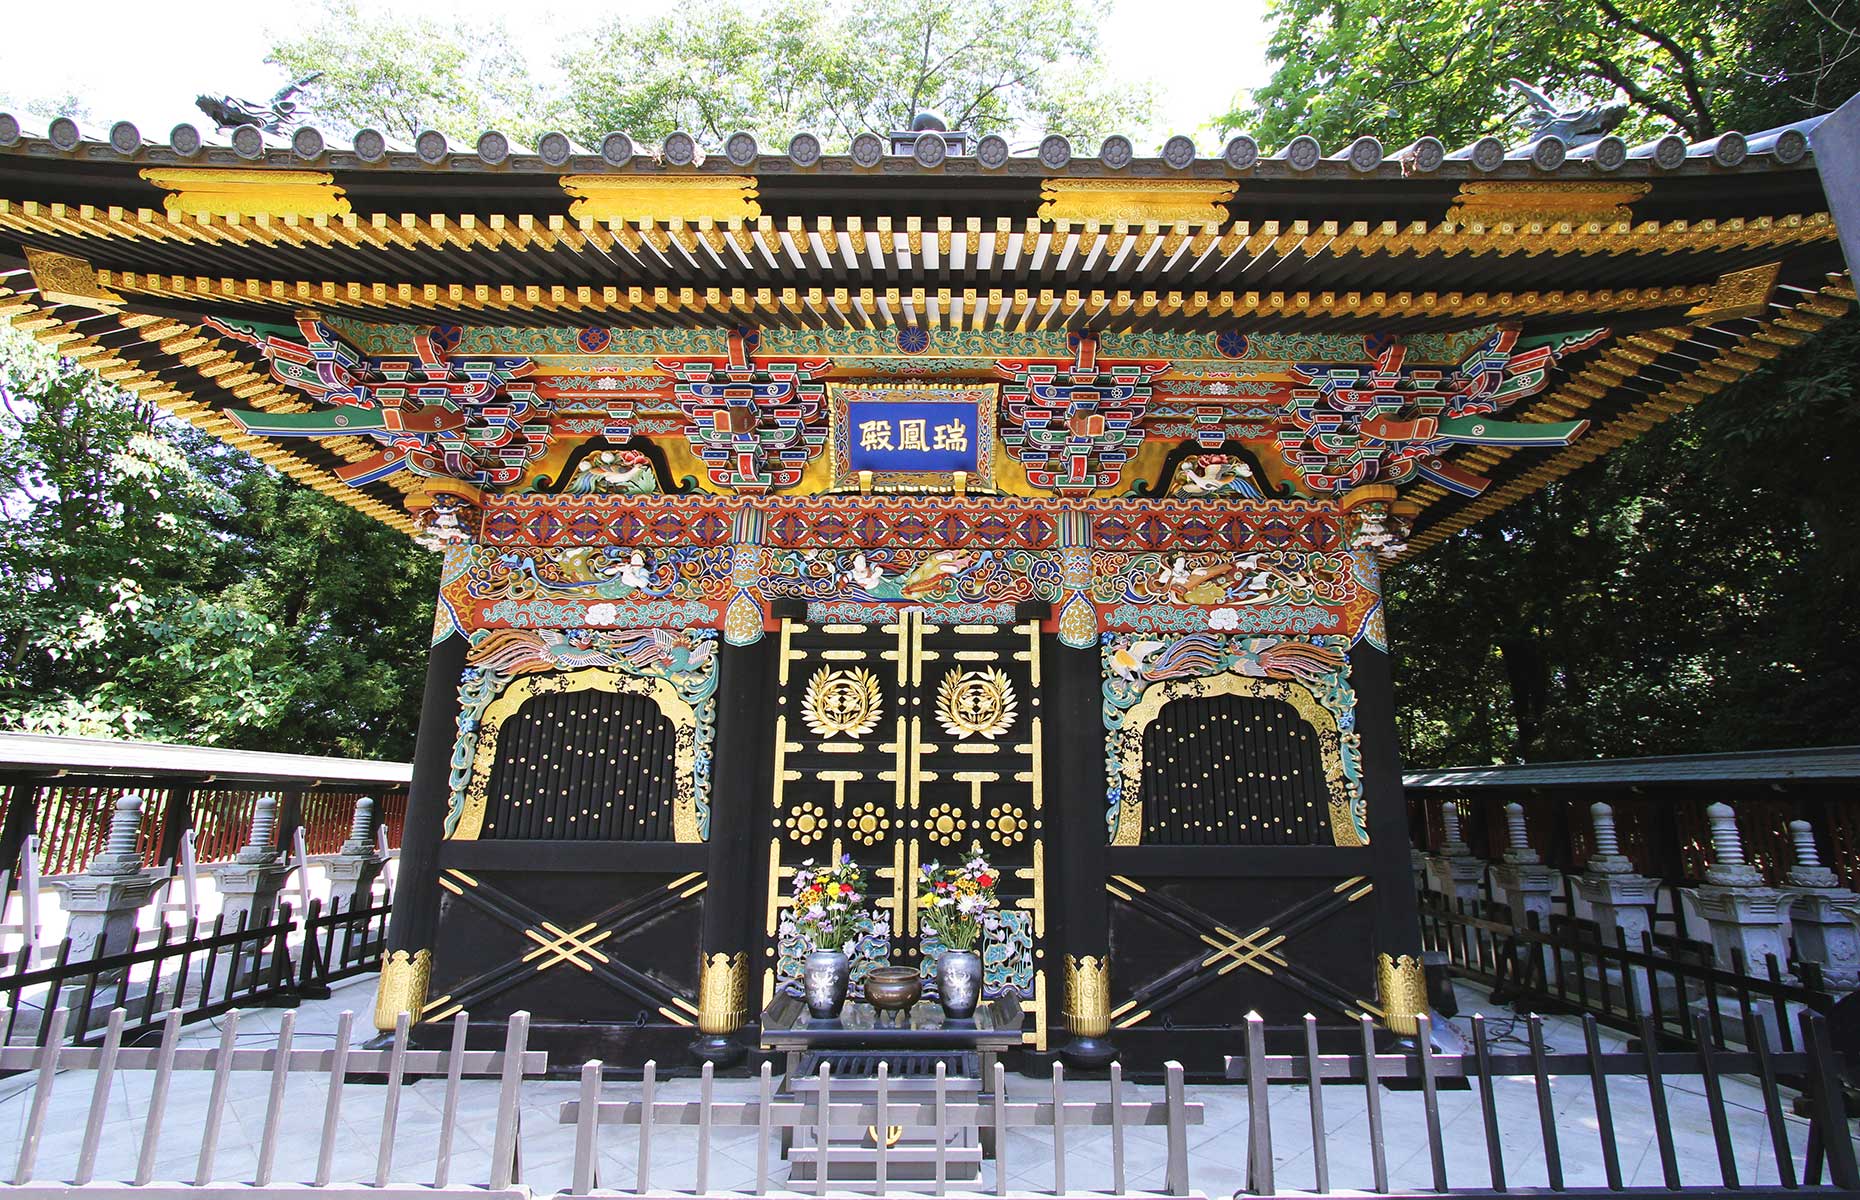 Date Masamune's mausoleum is dripping with gold